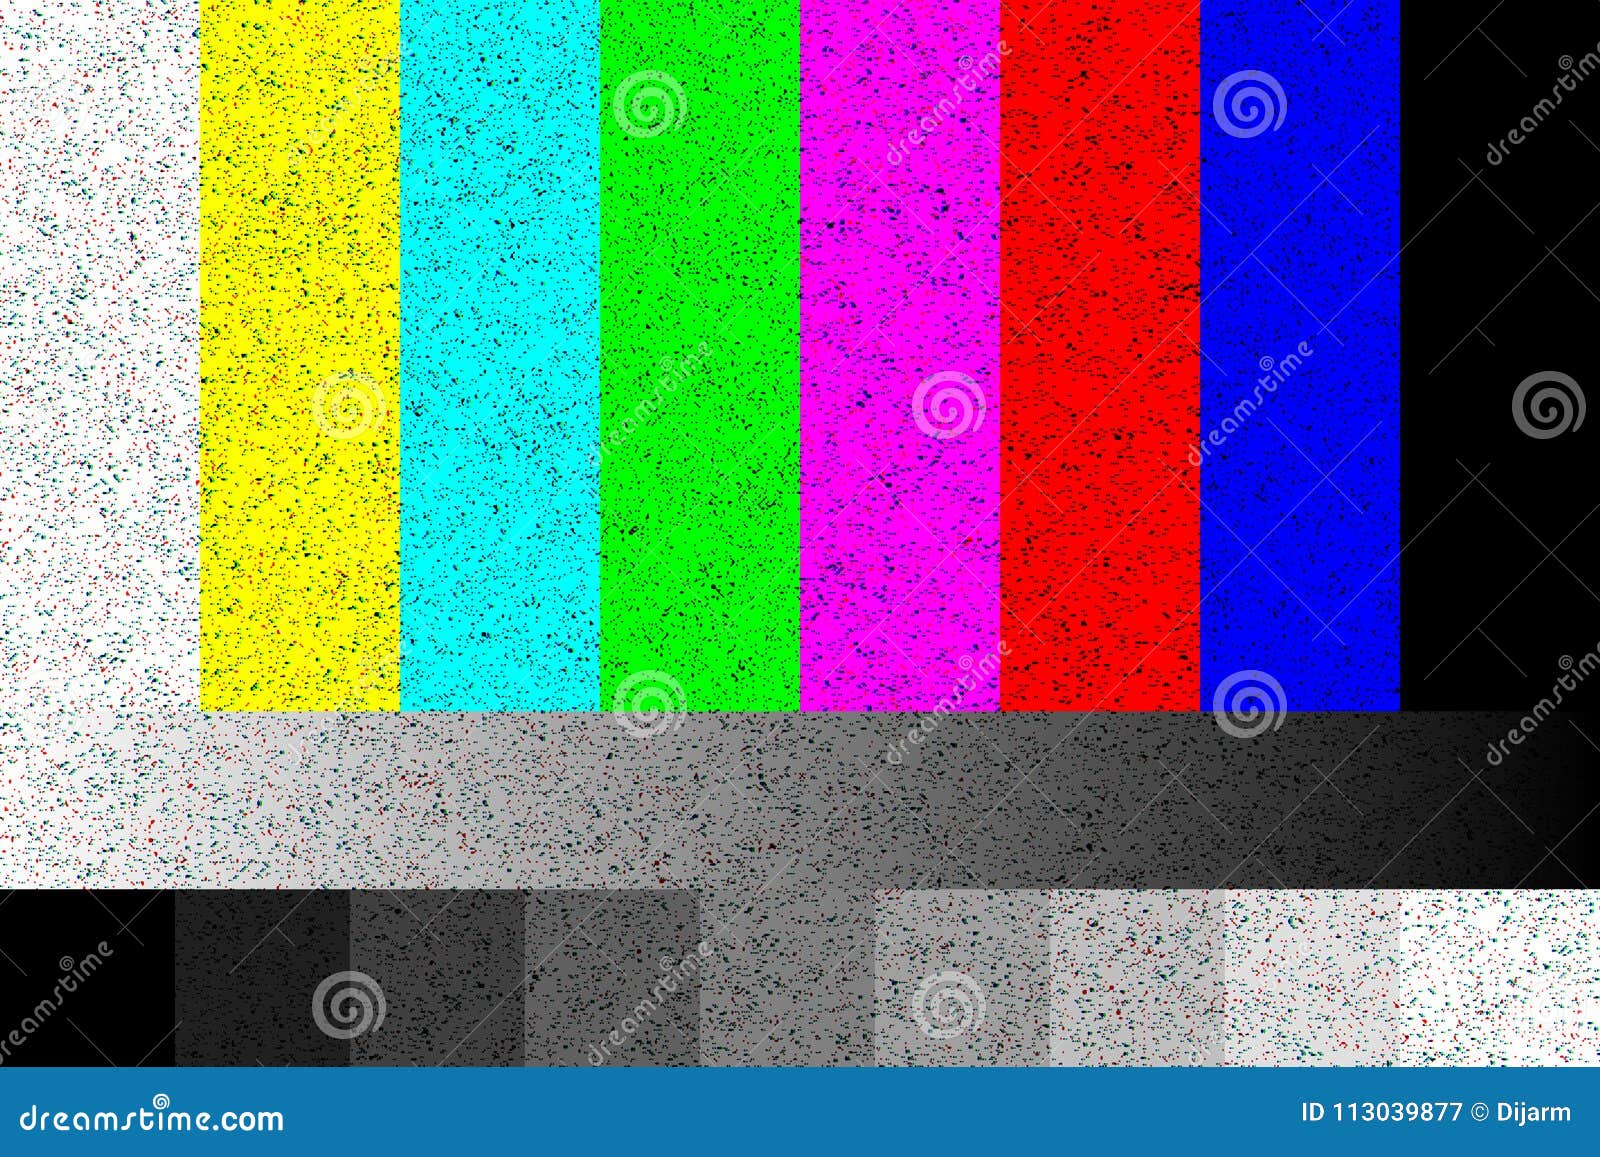 Tv No Signal. Rgb Static Screen with Noise. 4k, Full Hd Resolutions Stock  Illustration - Illustration of blank, film: 113039877